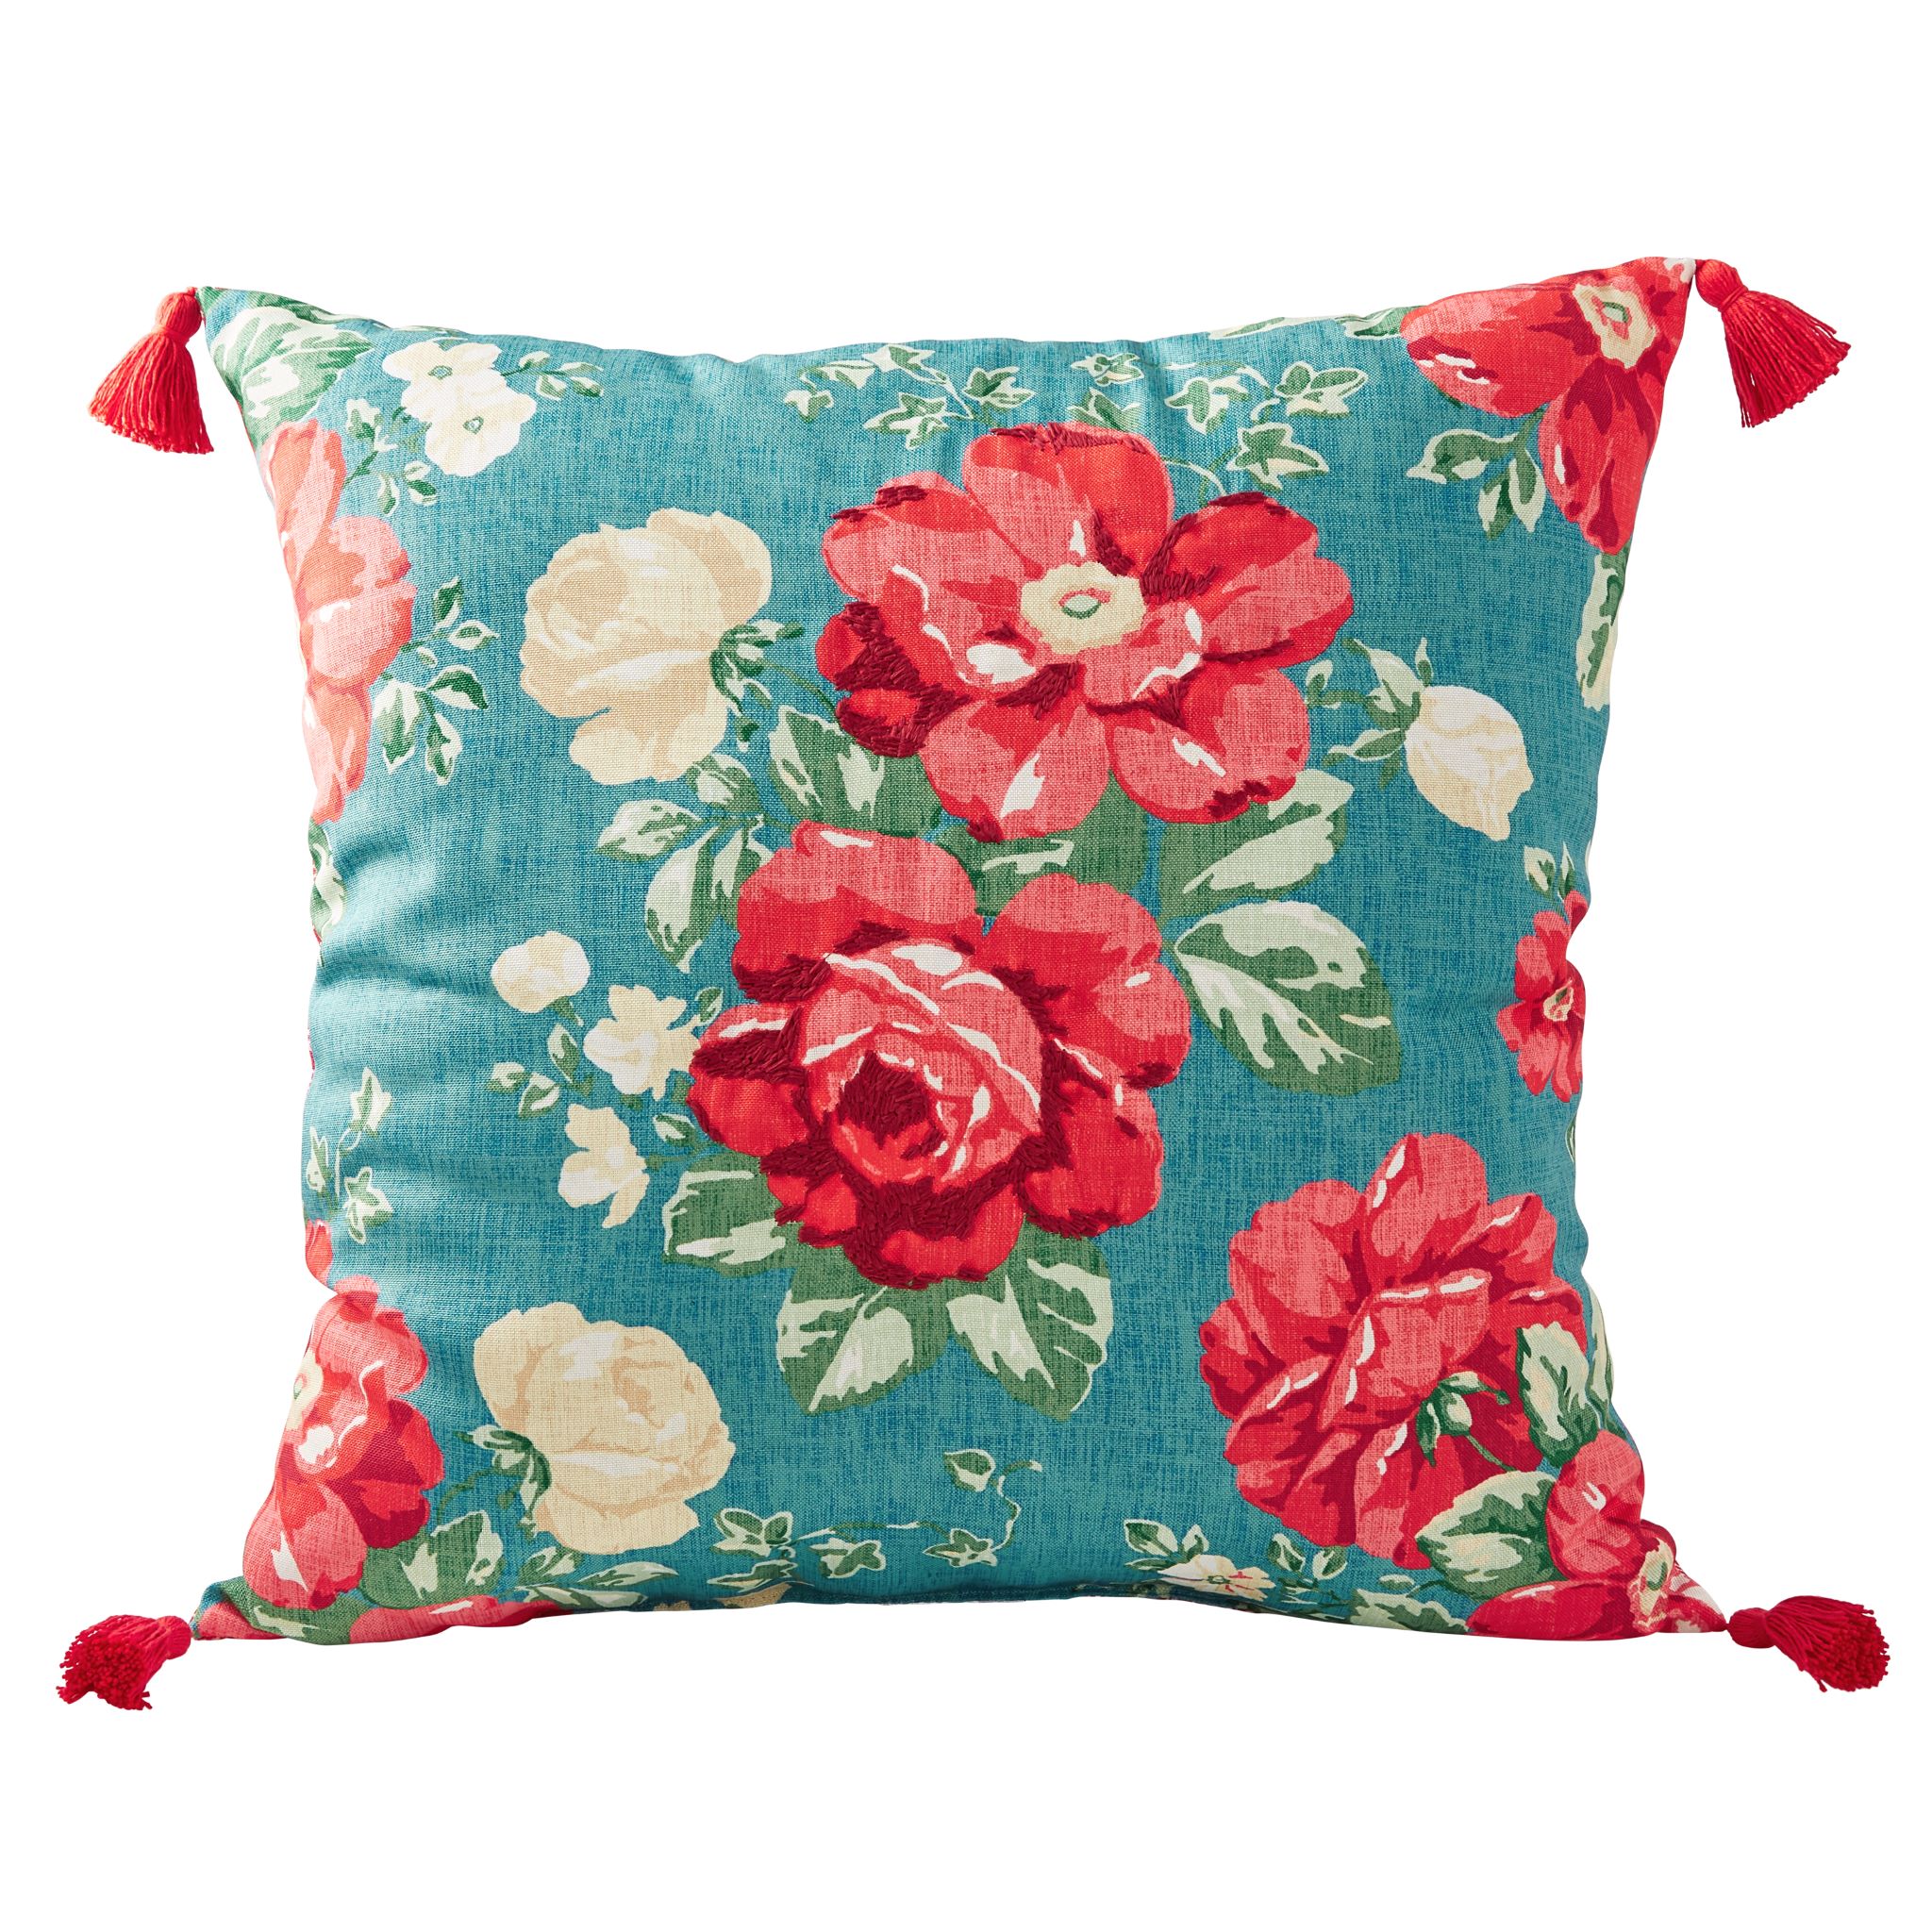 The Pioneer Woman Embr Vint Floral Outdoor Pillow, 20" x 20", Multicolor - image 1 of 9